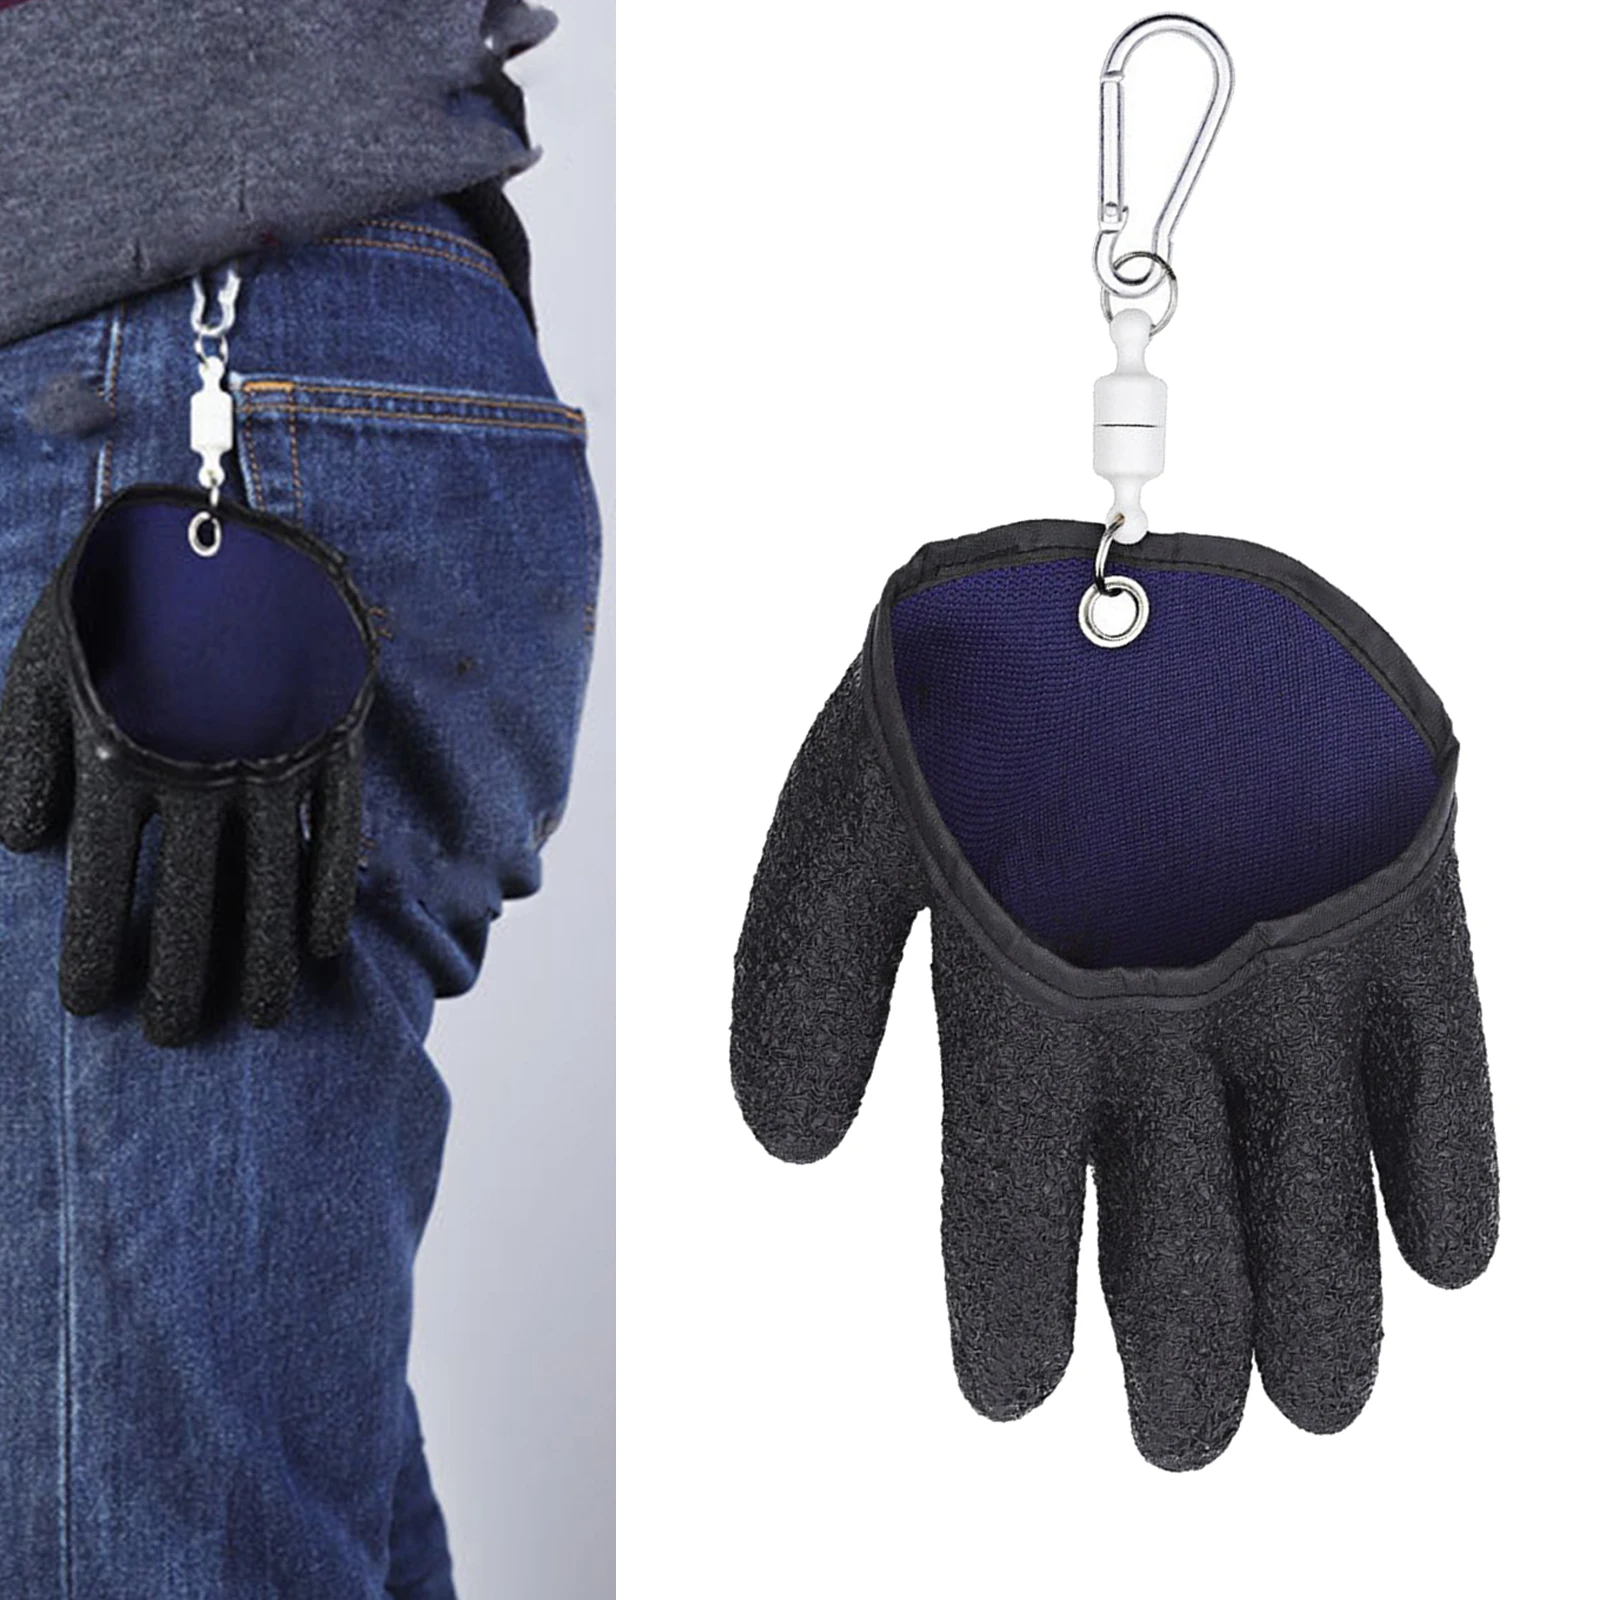 Right / Left Fishing Gloves W / Magnet Puncture Resistant Hooks